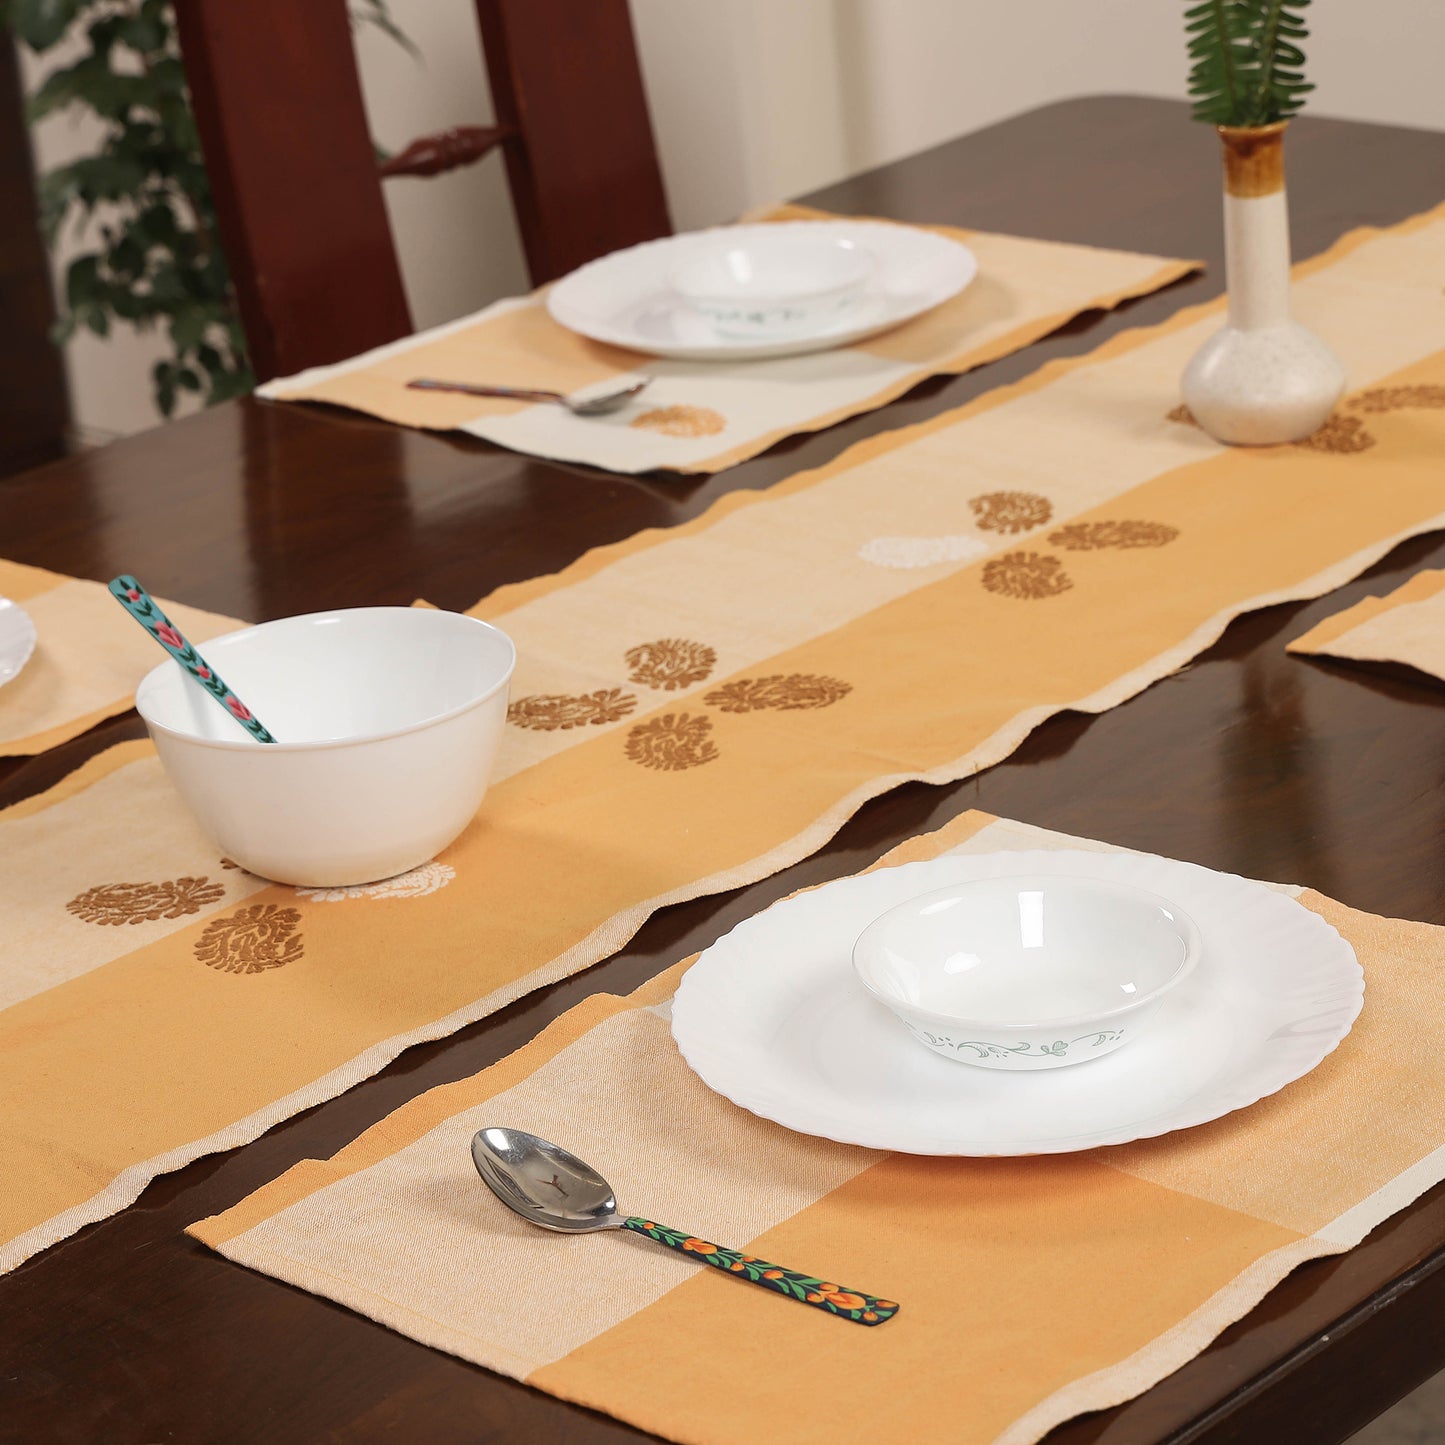 Assam Weave Dining Table Runner & Set of 4 Placemats in Handloom Cotton